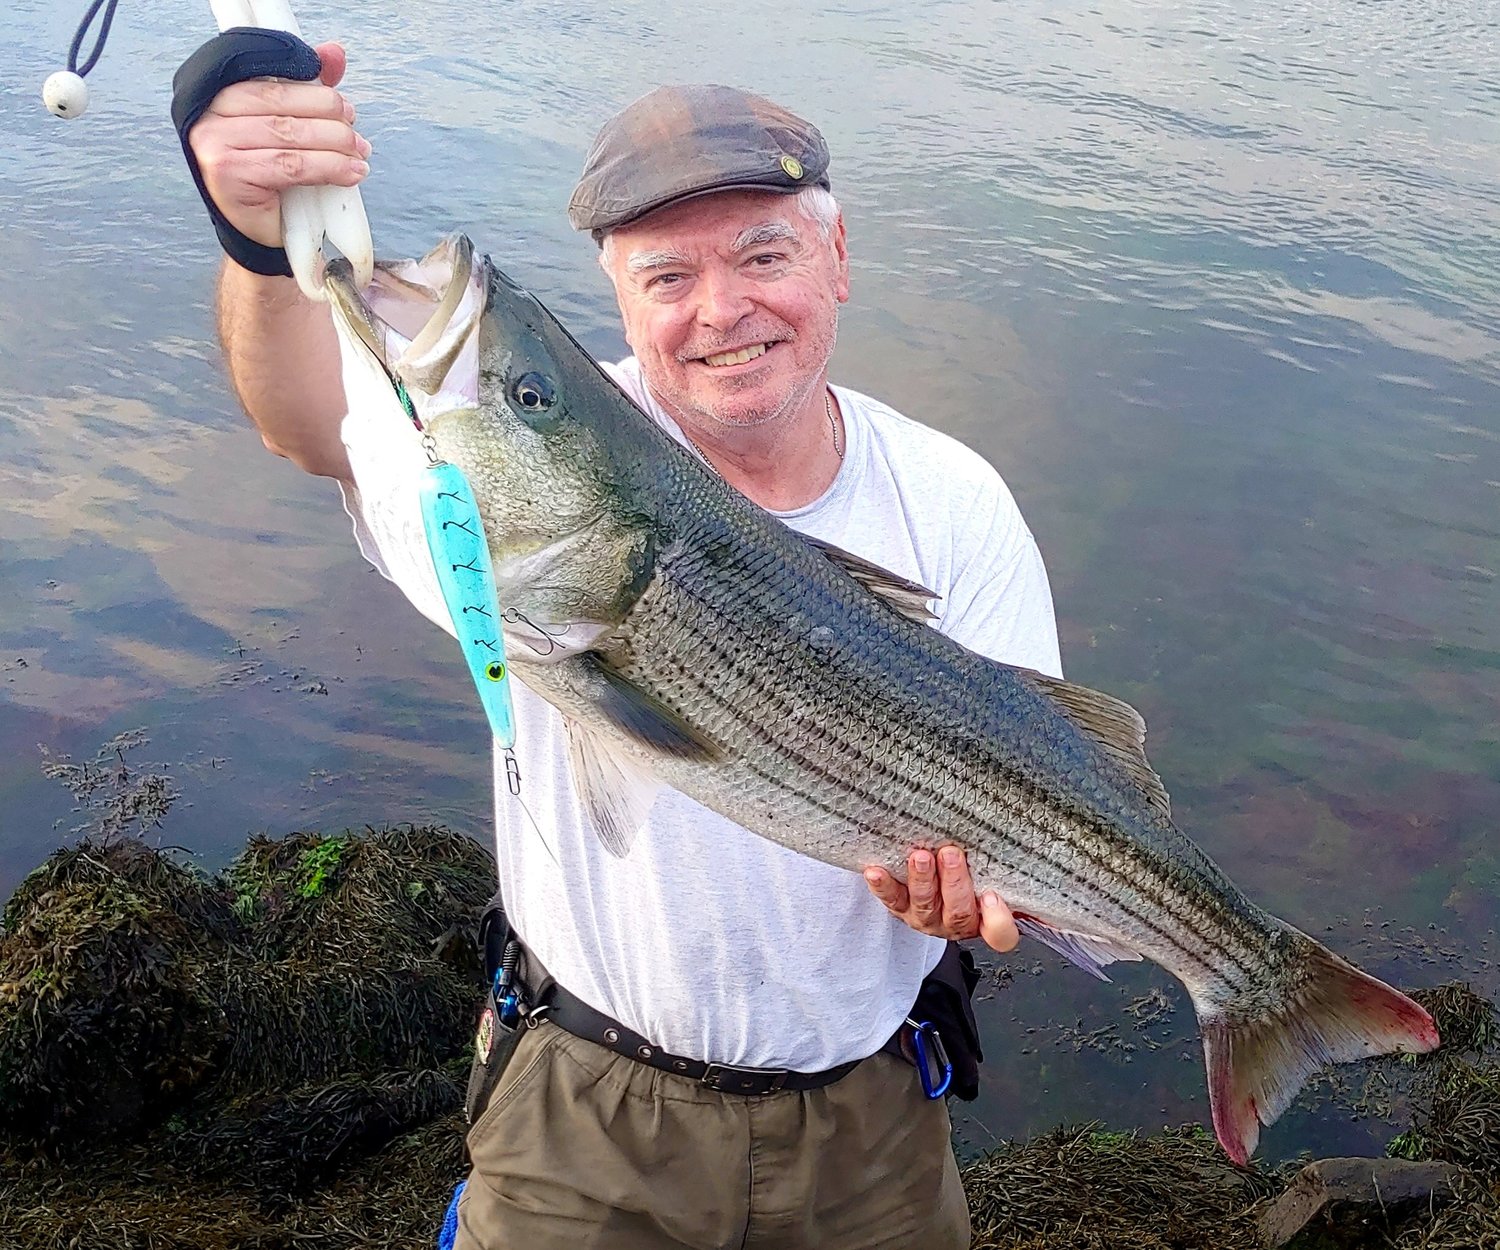 East End Eddie Doherty with the 21 pound striped bass he caught this week on the Cape Cod Canal.